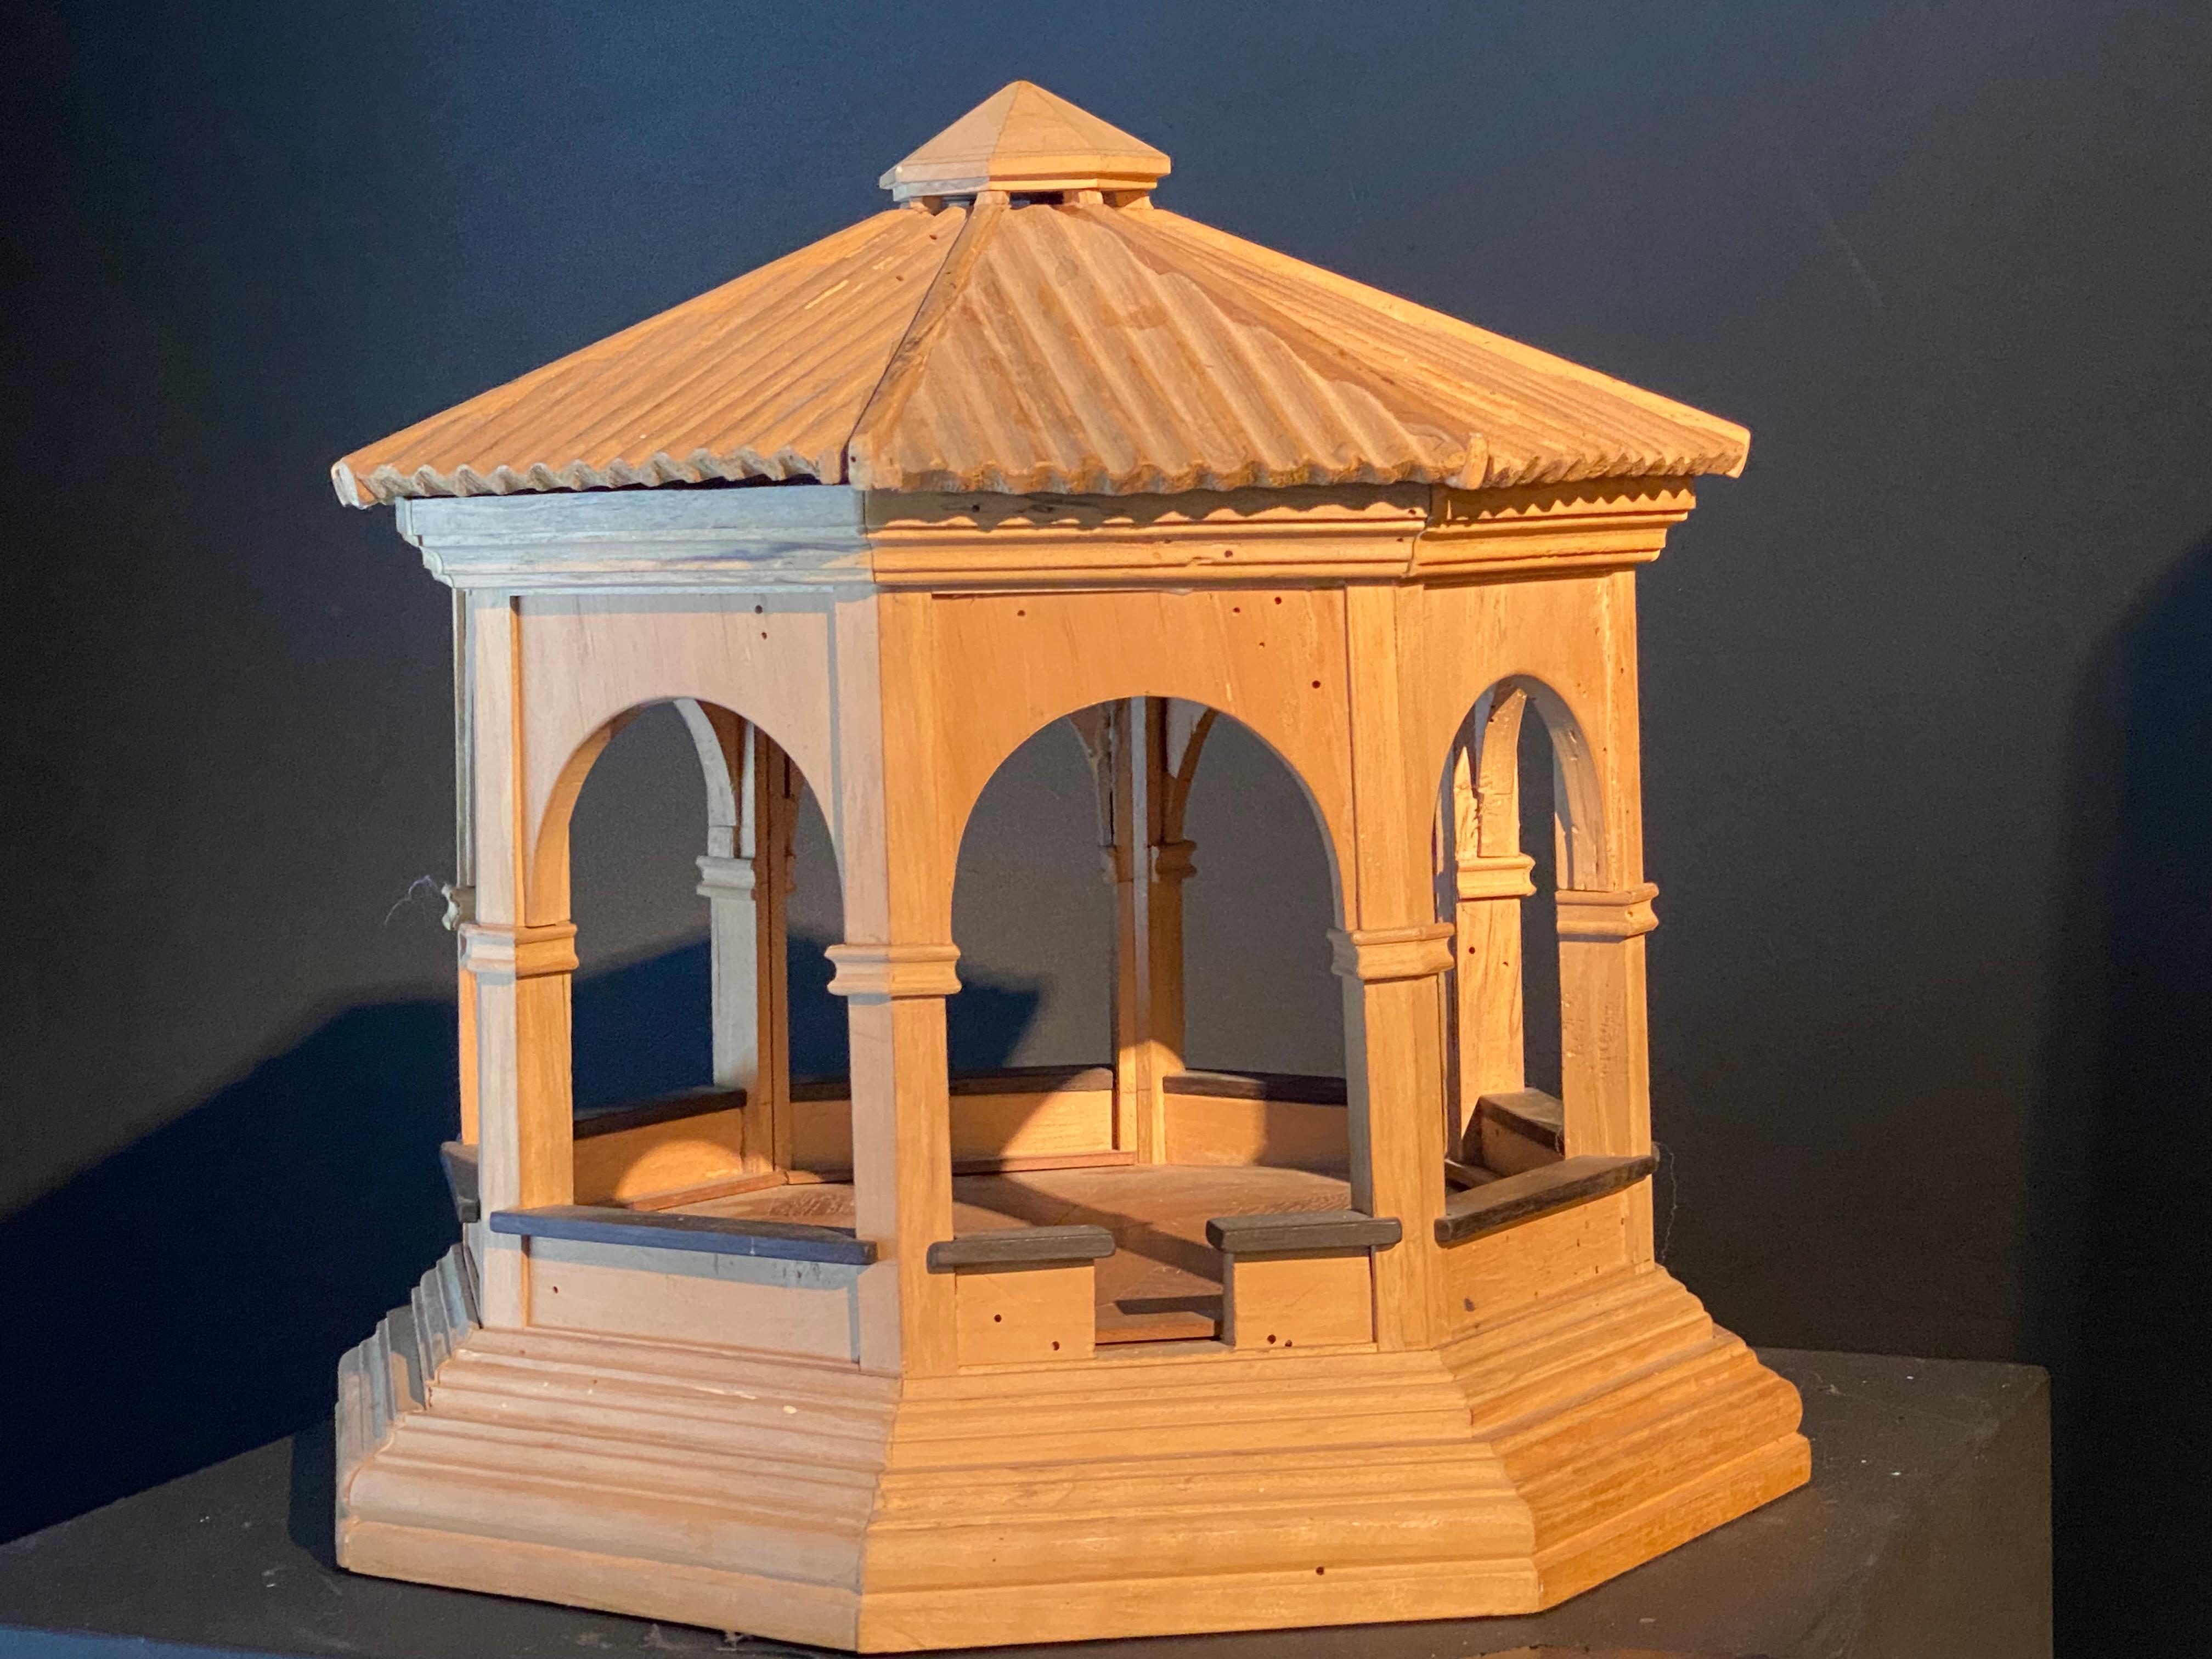 Patinated Small Wooden Vintage Architects Model of a Wooden Kiosk